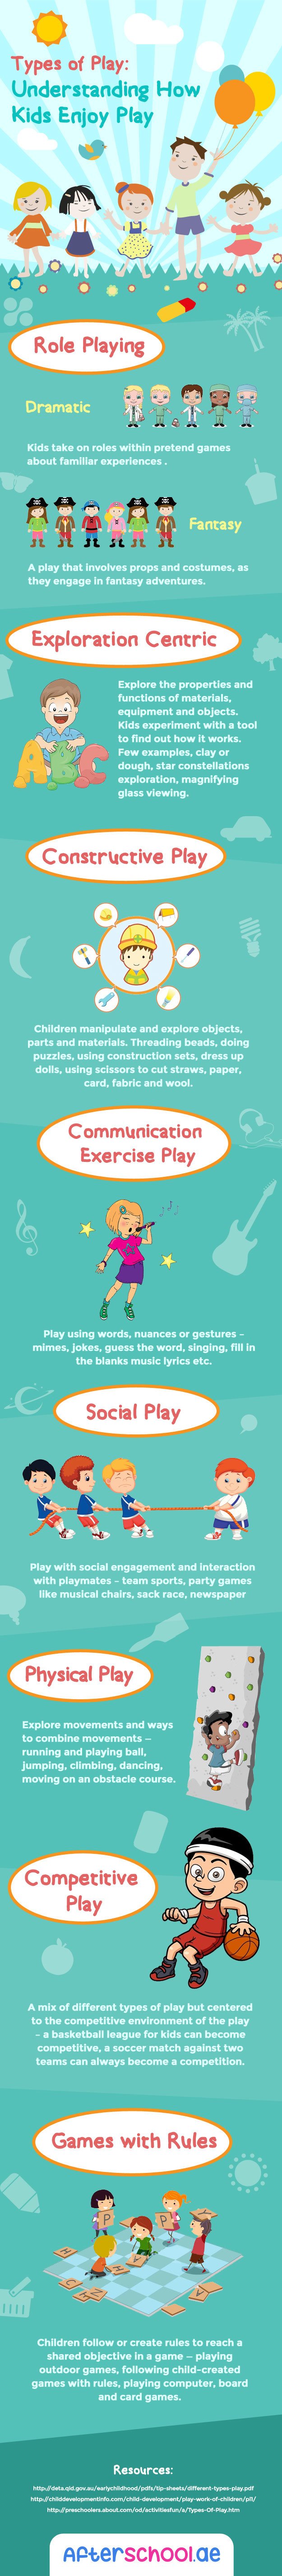 Different Ways Kids Play Infographic